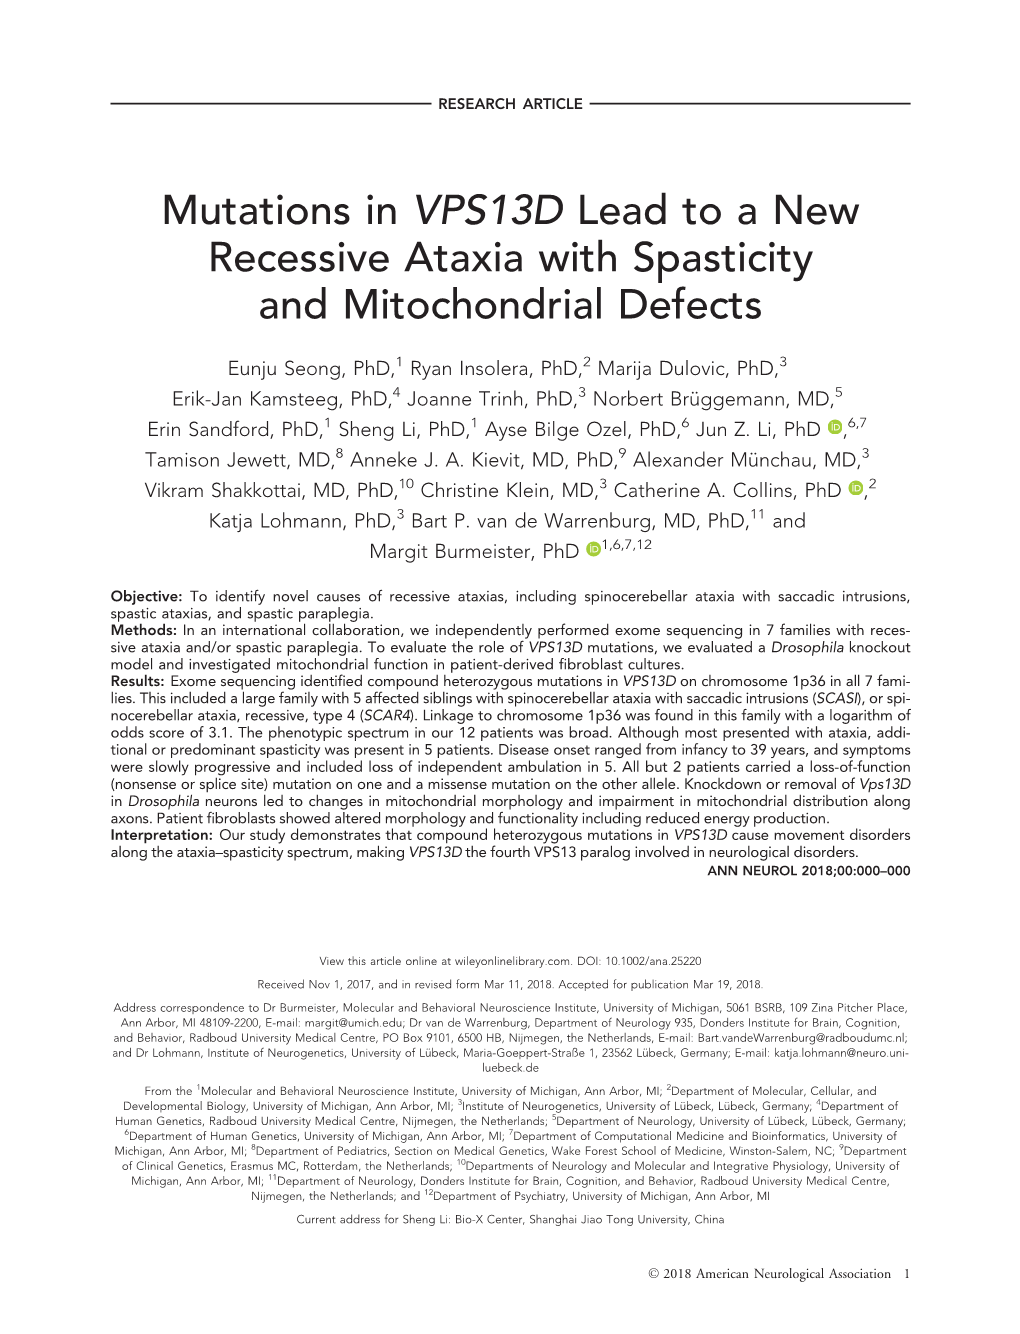 Mutations in VPS13D Lead to a New Recessive Ataxia with Spasticity and Mitochondrial Defects